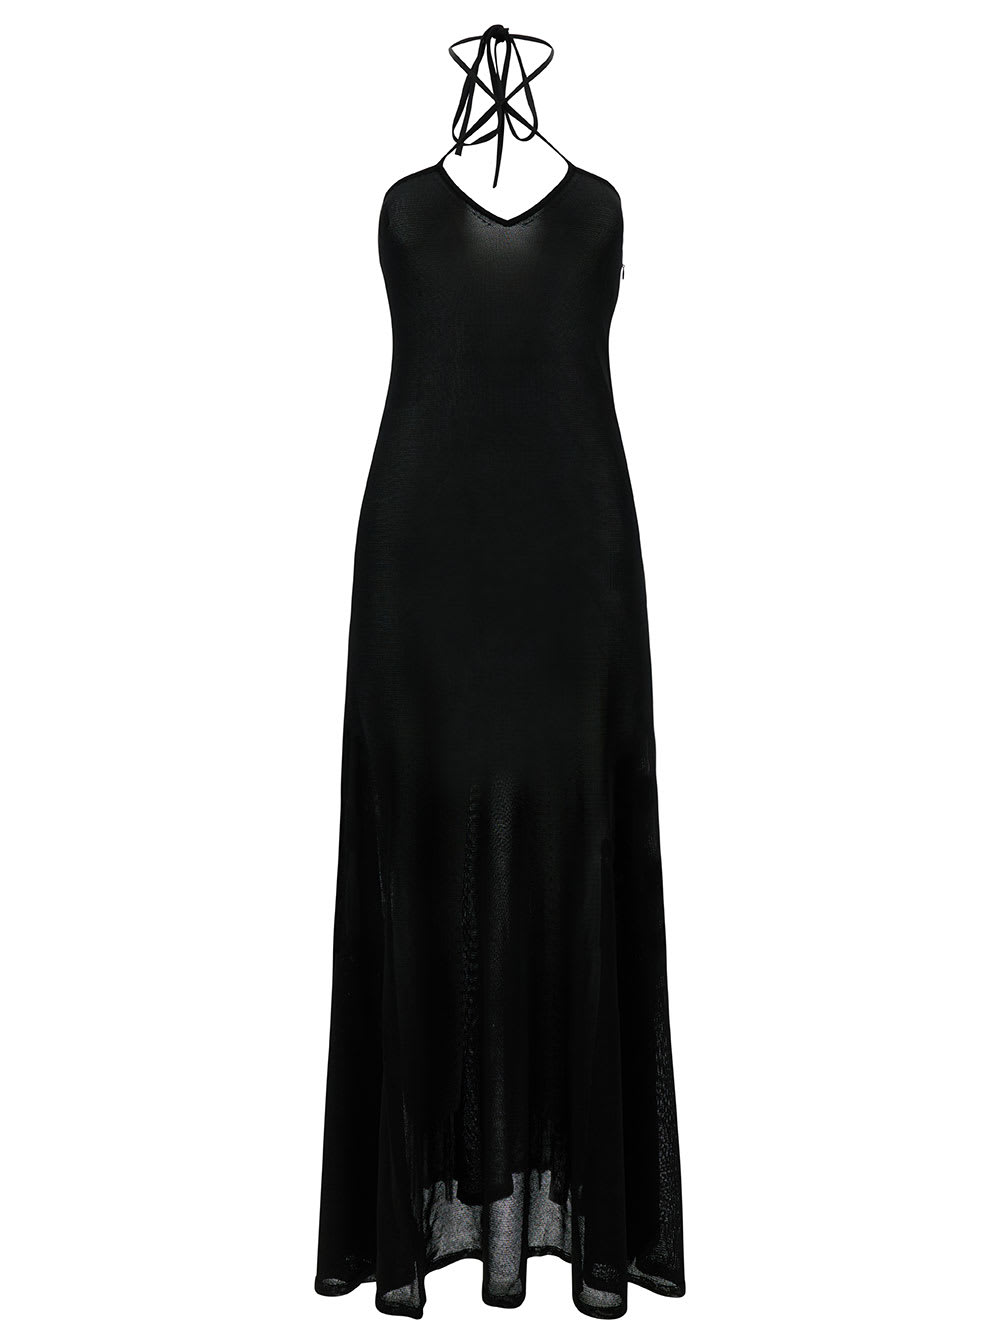 TOM FORD MAXI BLACK DRESS WITH HALTERNECK IN FINE KNIT WOMAN